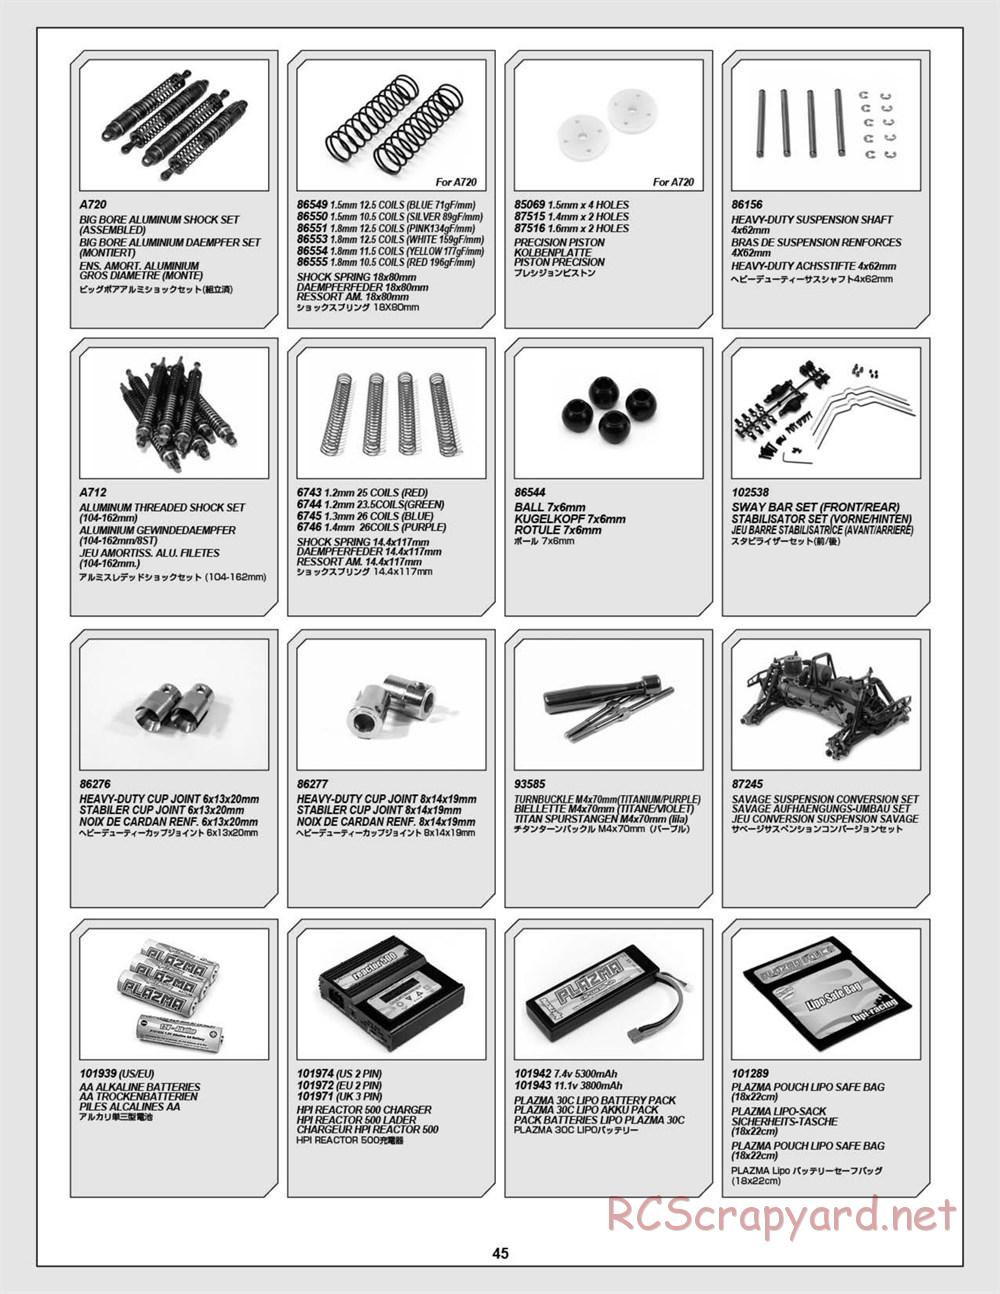 HPI - Super 5SC Flux - Exploded View - Page 45